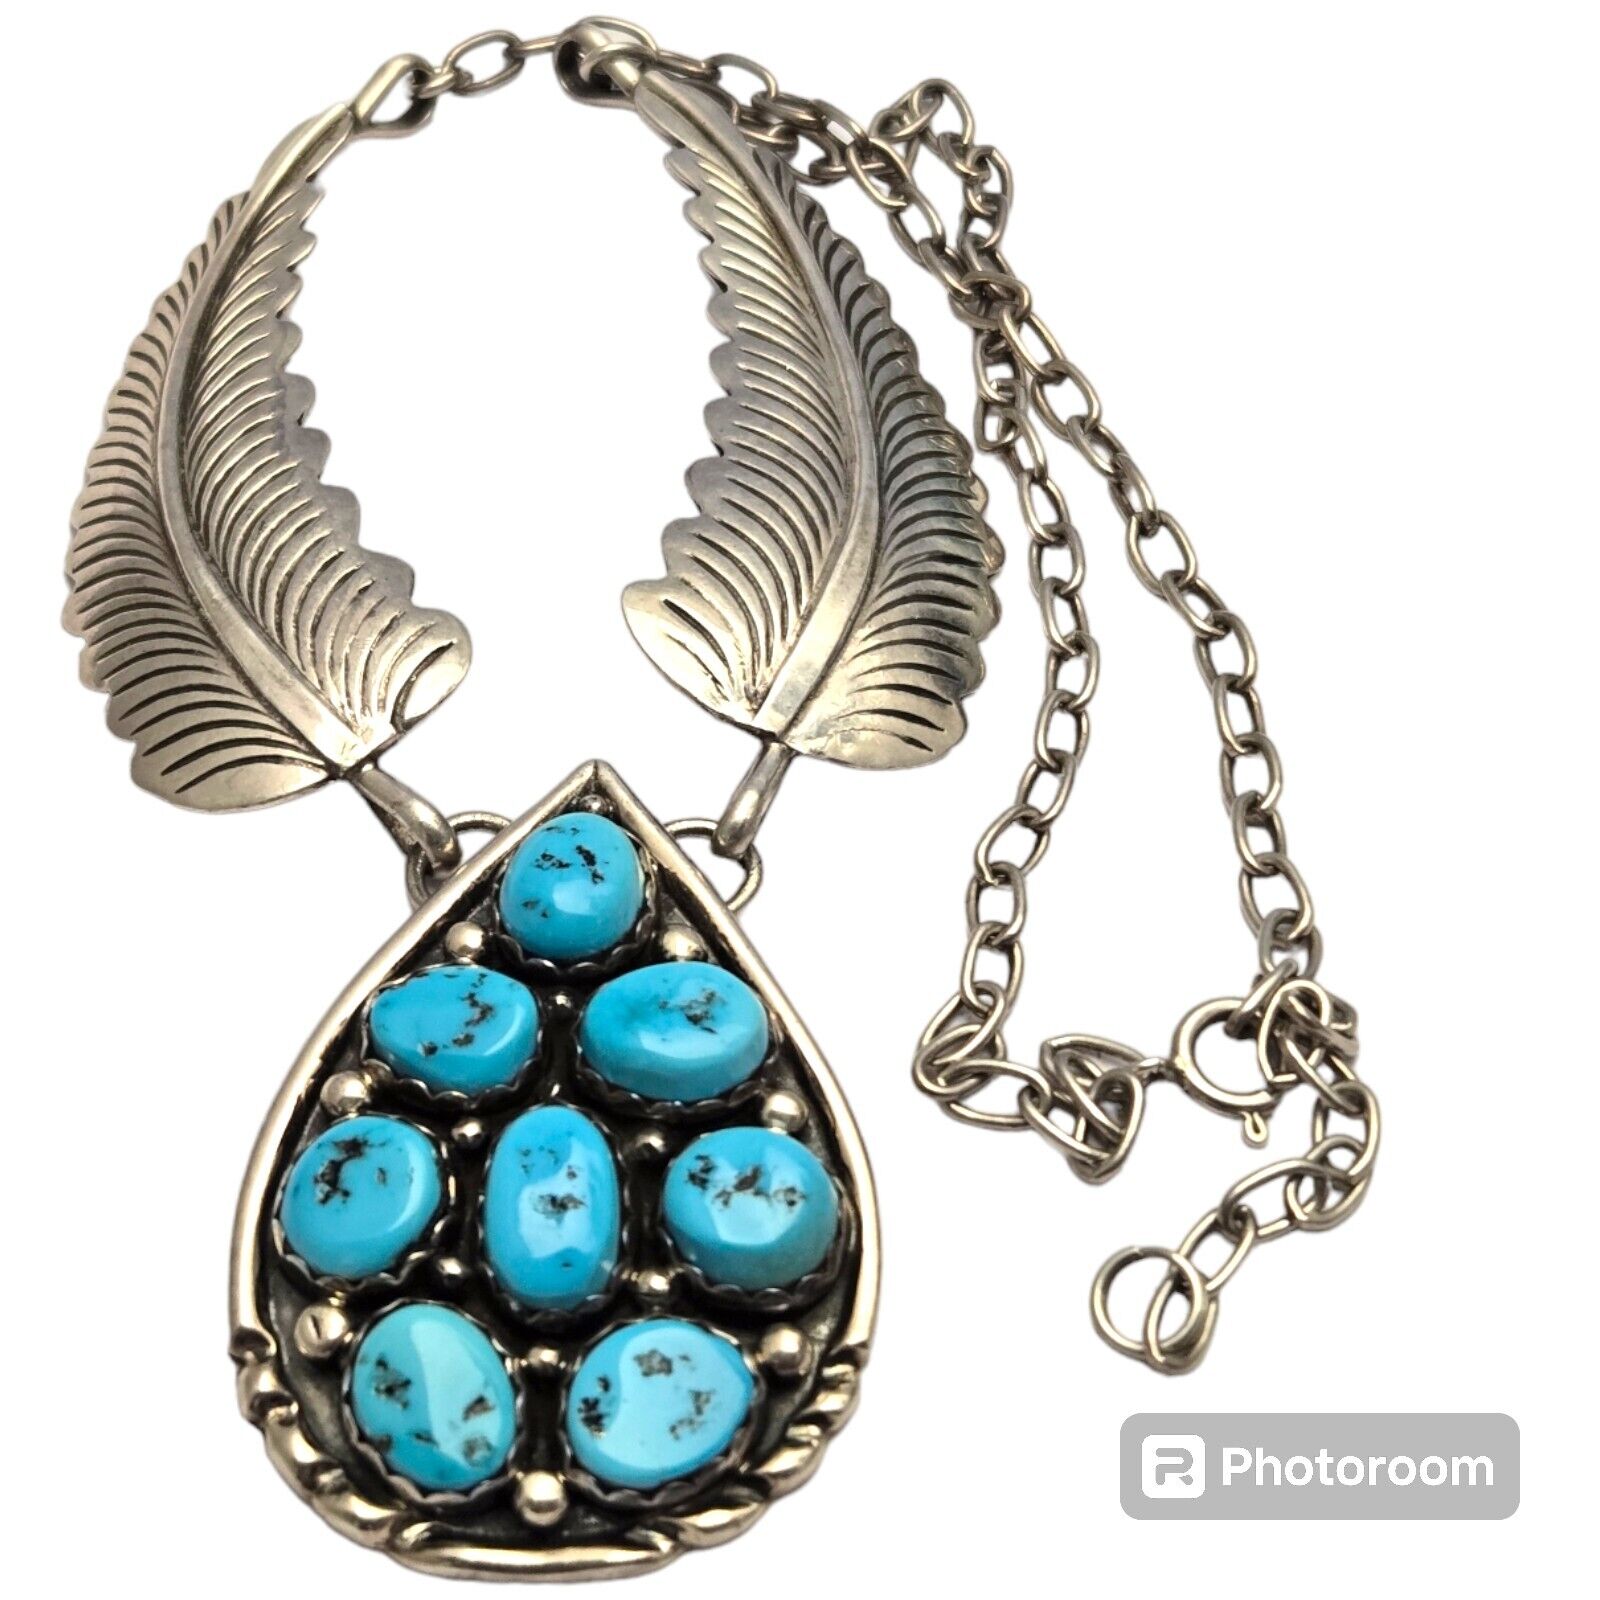 Mesmerizing VINTAGE NAVAJO Kingman TURQUOISE CLUSTER STERLING SILVER NECKLACE 